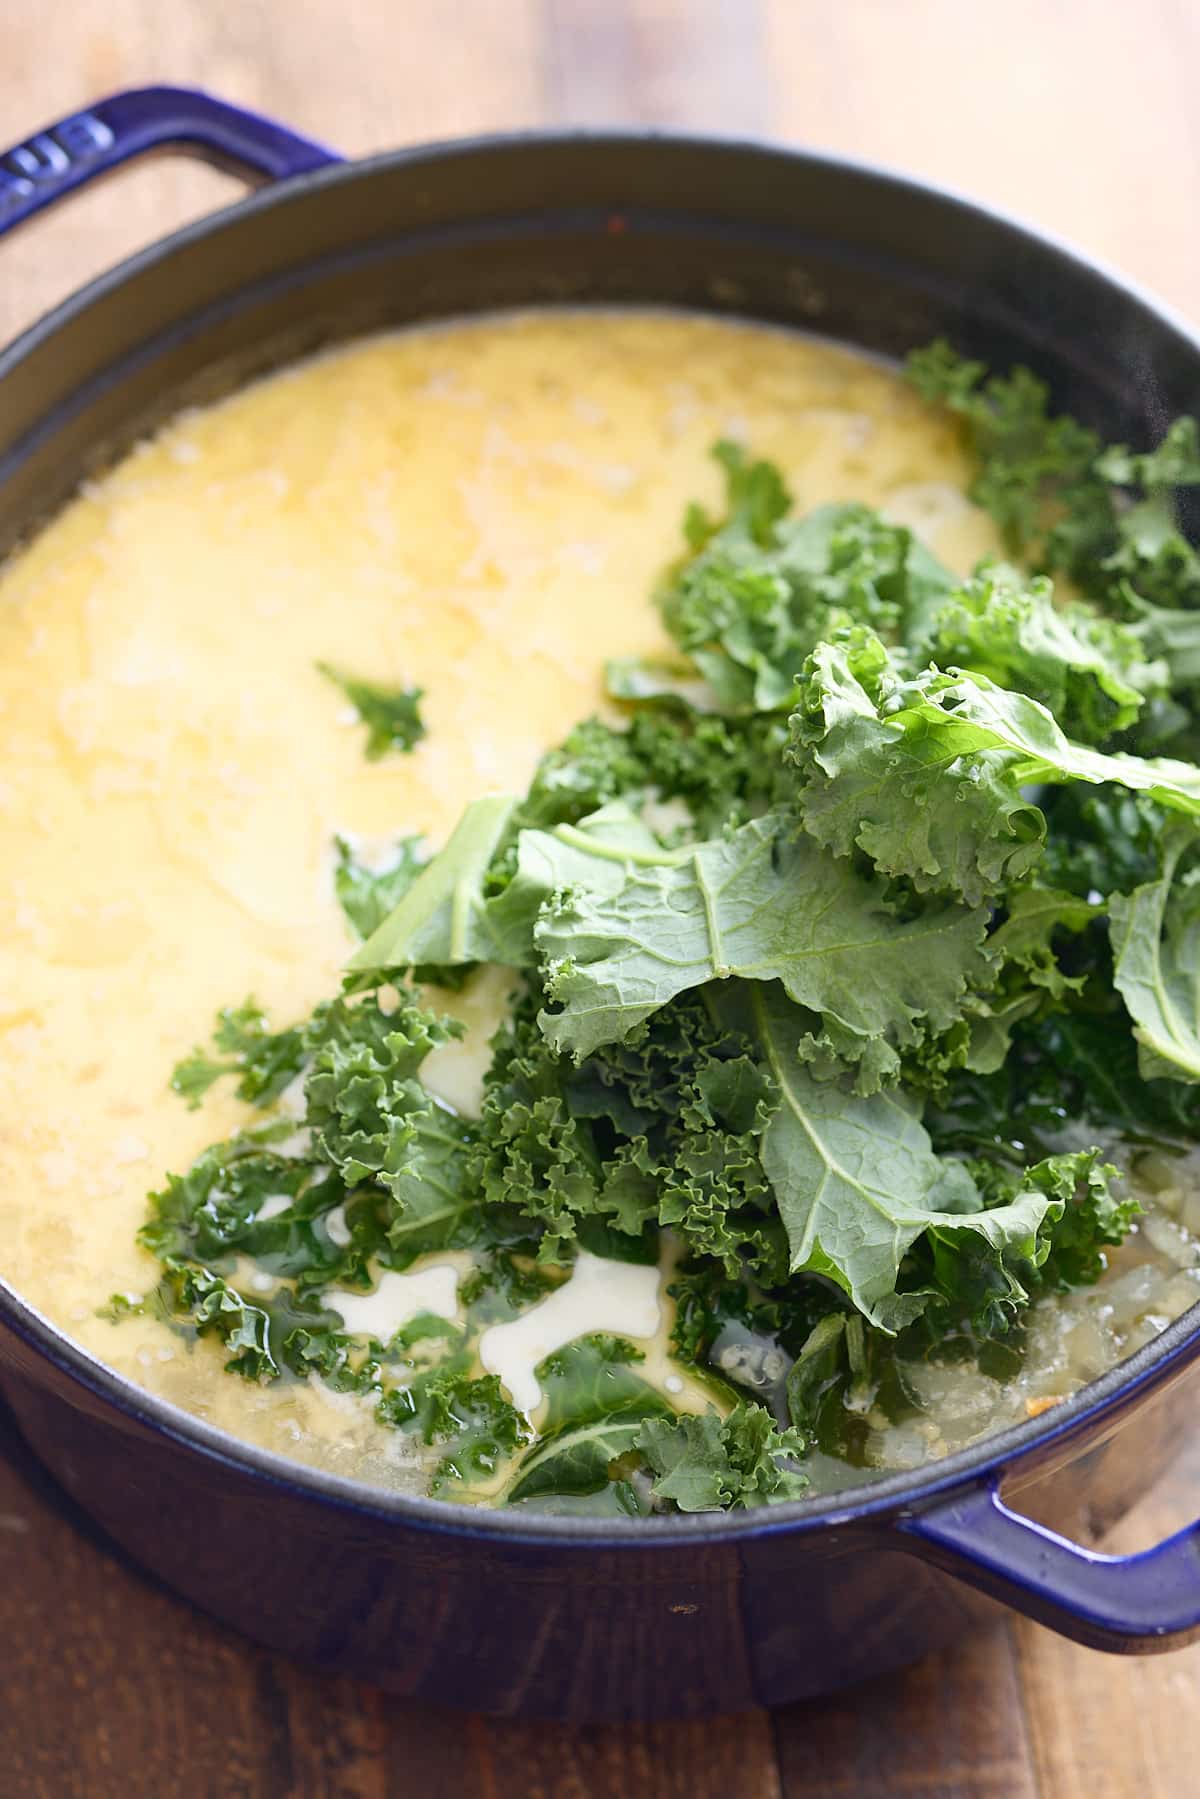 Kale and cream added to the soup.